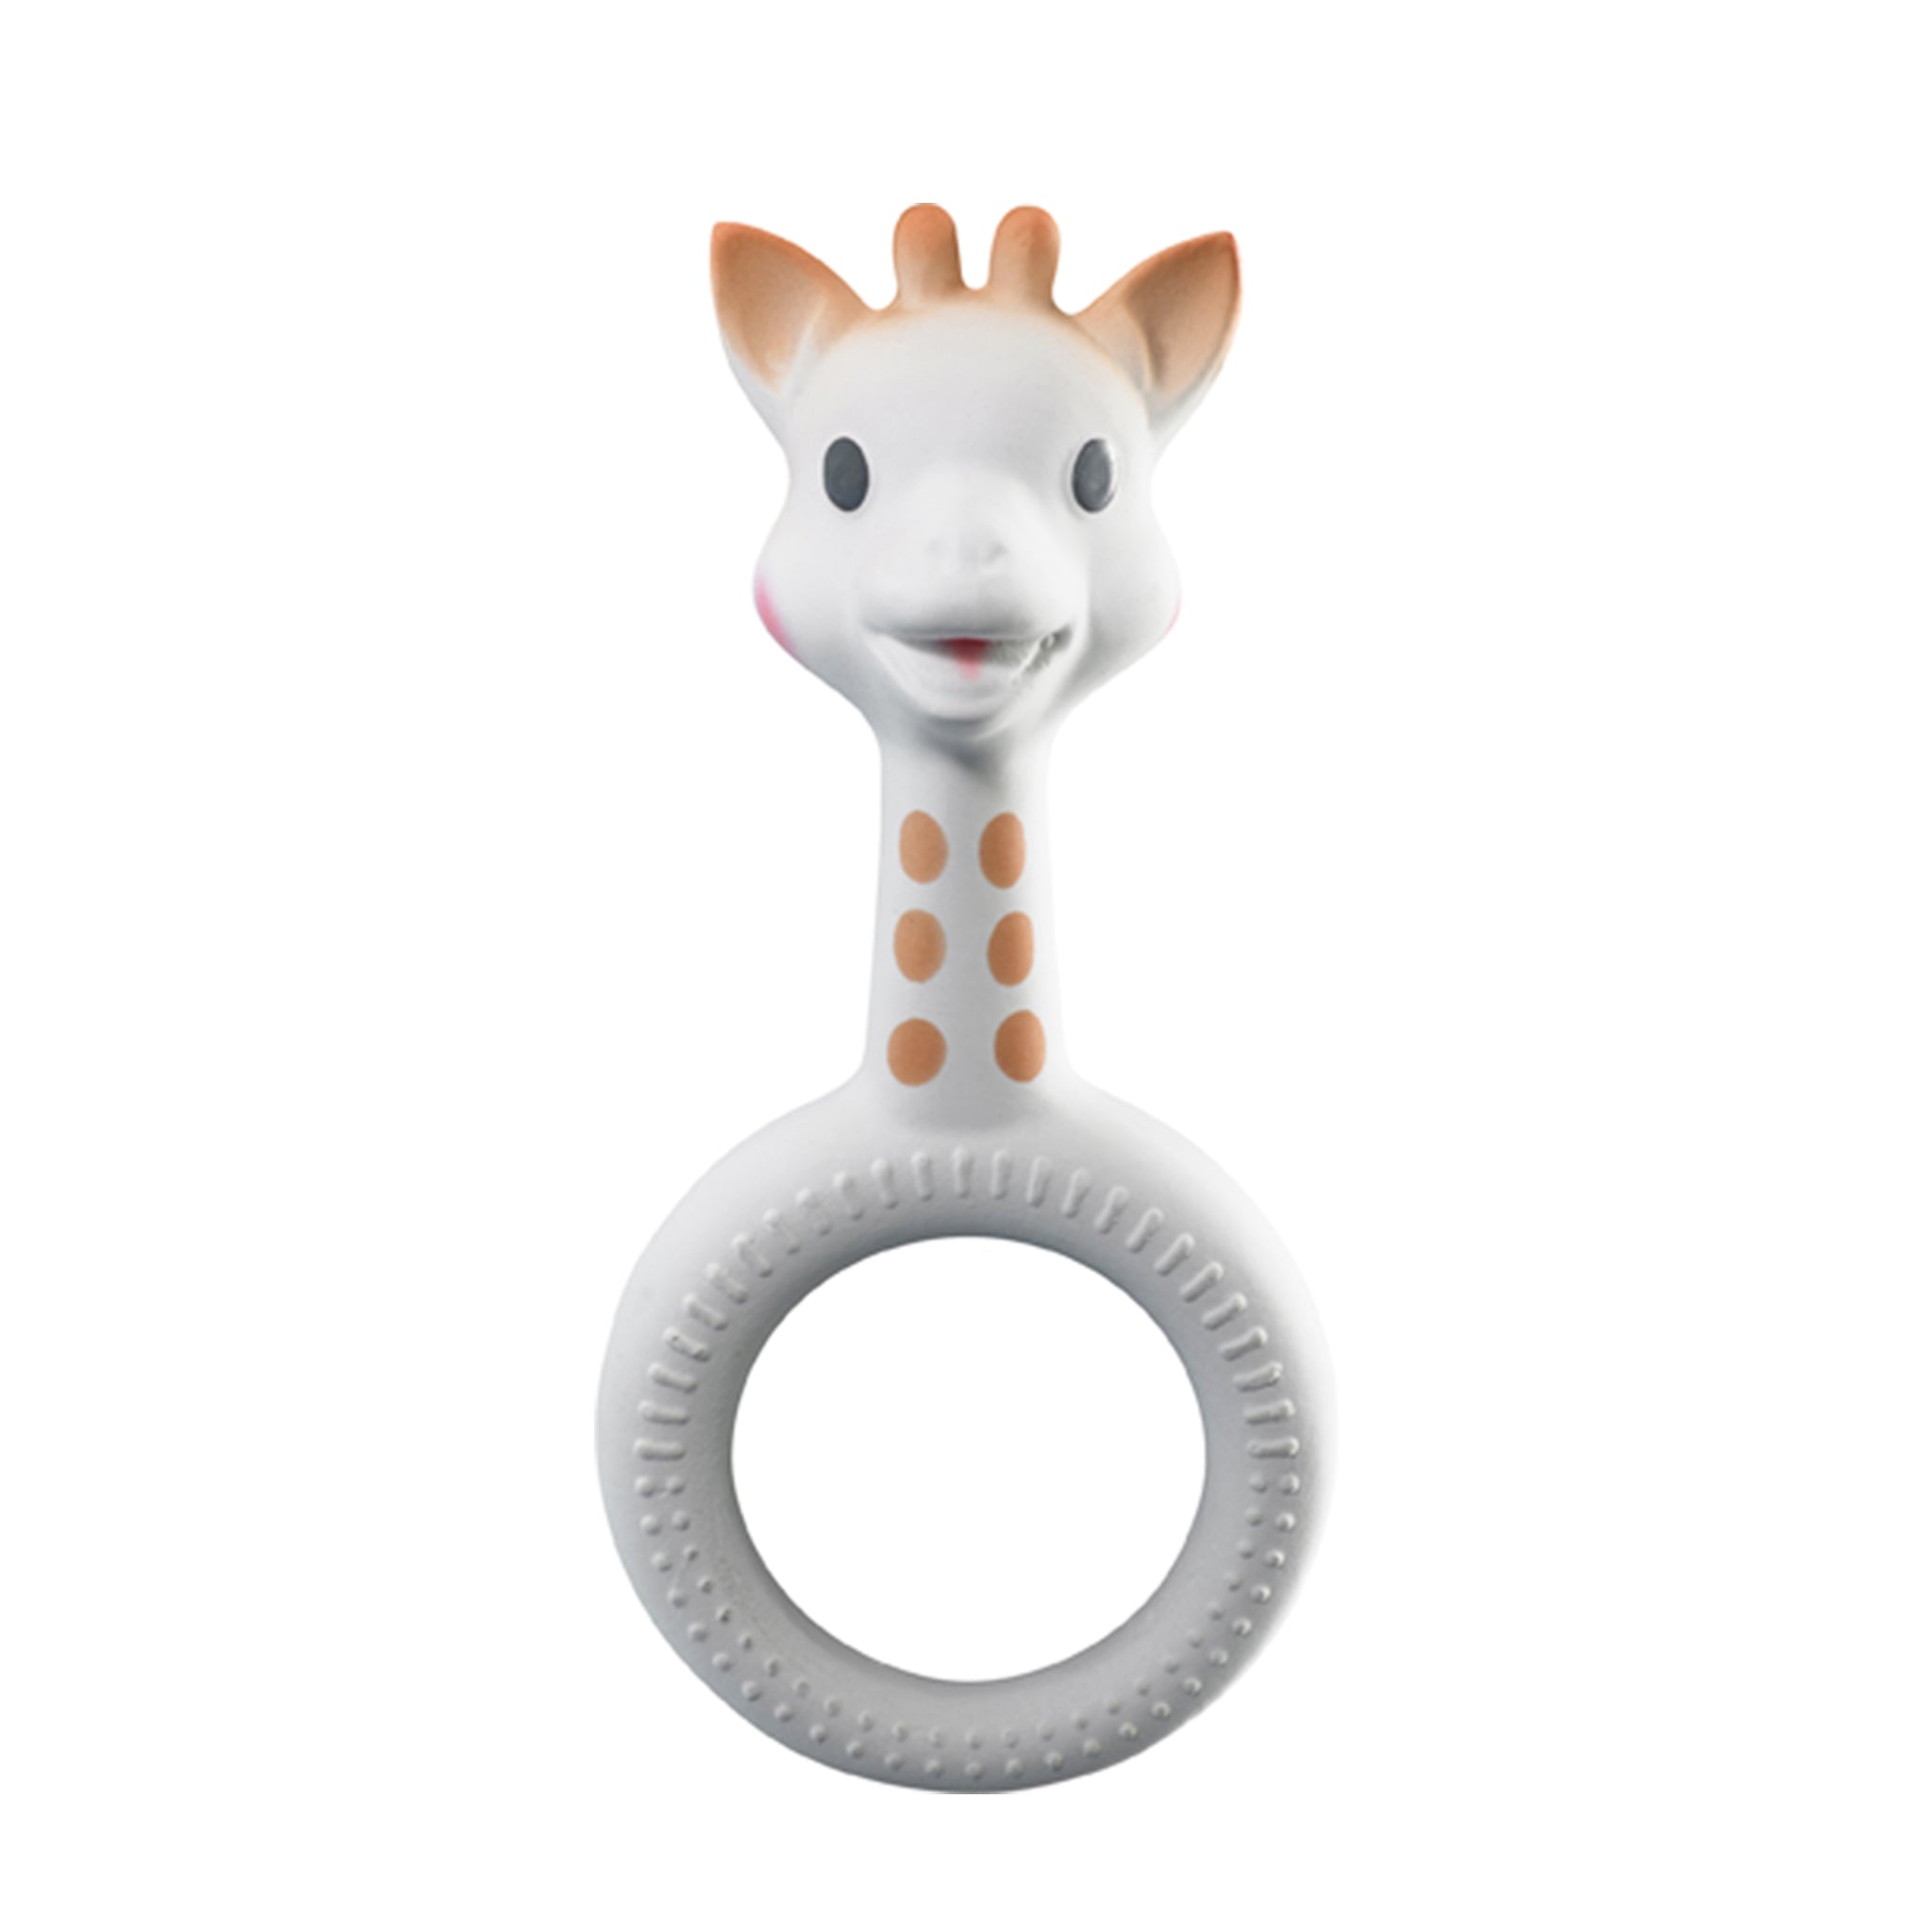 So'Pure Swaddle Ring Sophie la girafe – Calisson Toys